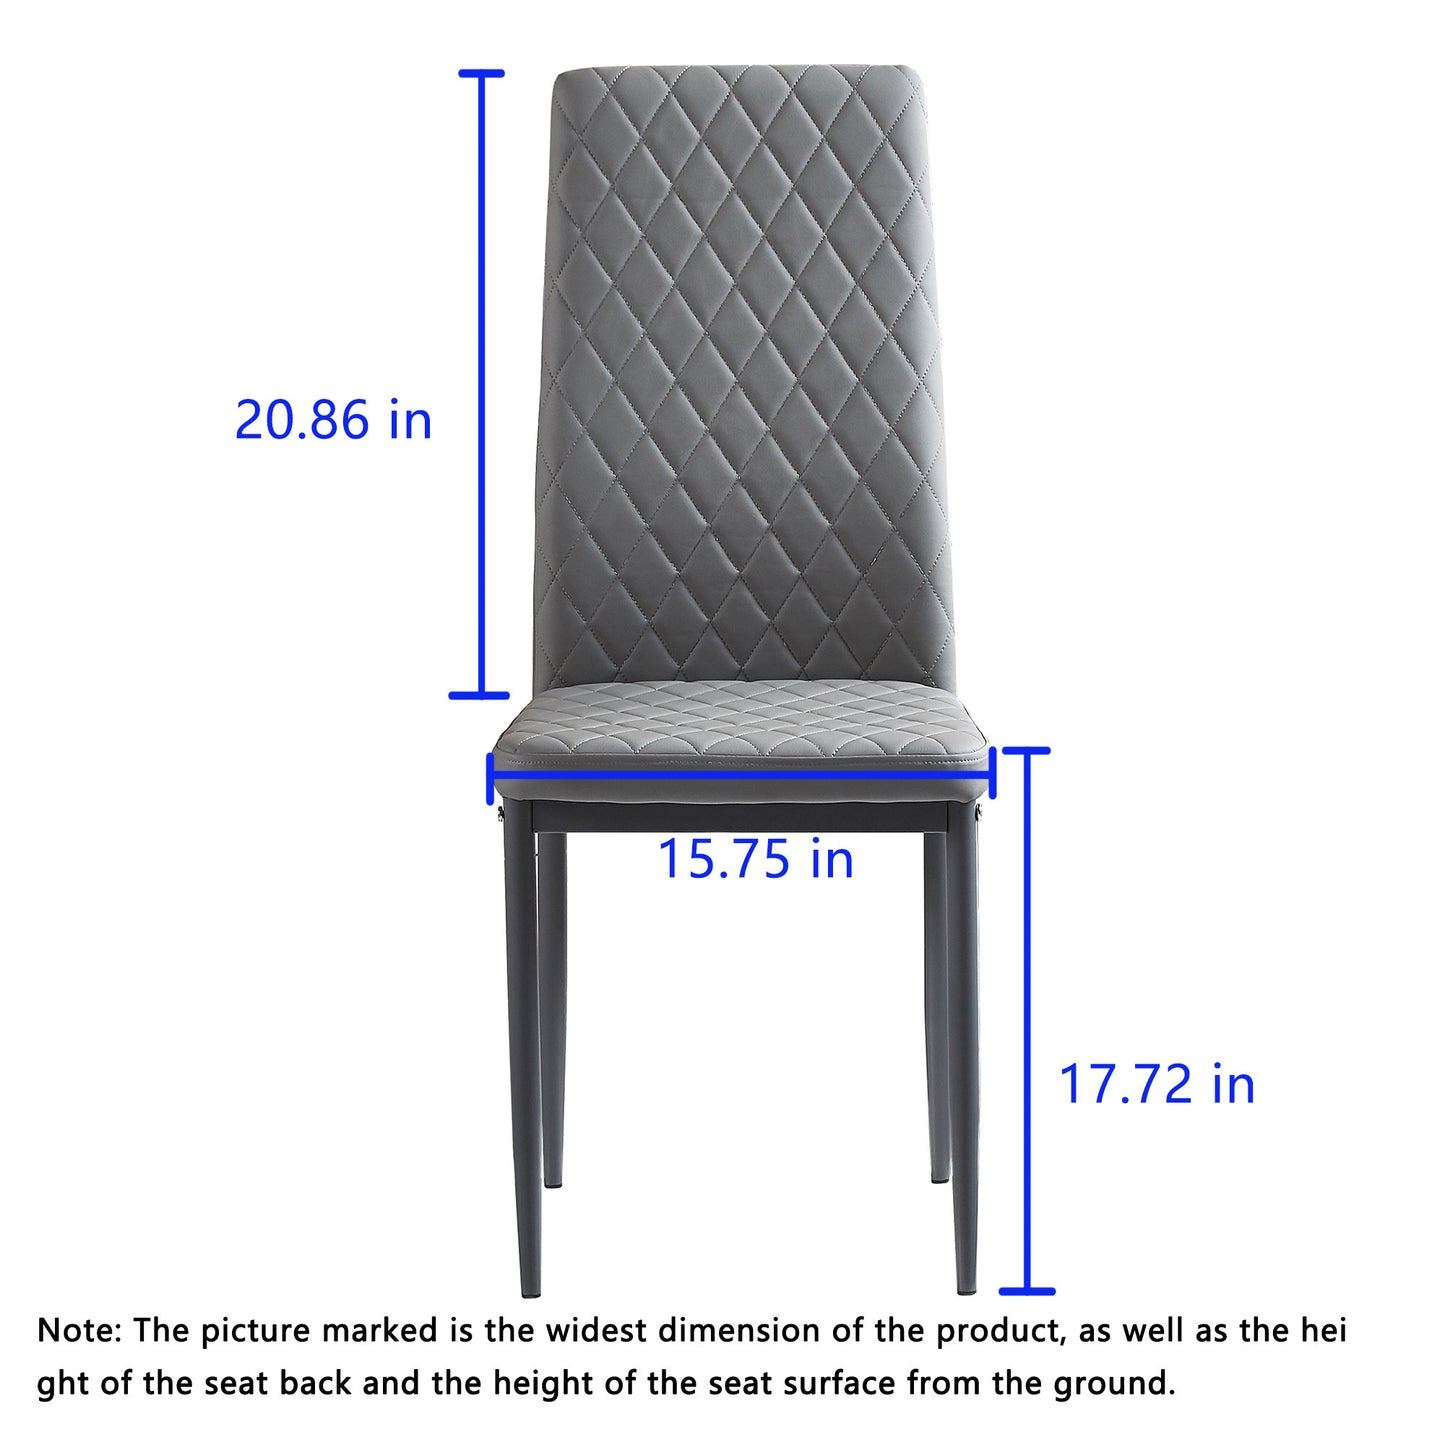 Light Gray modern minimalist dining chair fireproof leather sprayed metal pipe diamond grid pattern restaurant home conference chair set of 6